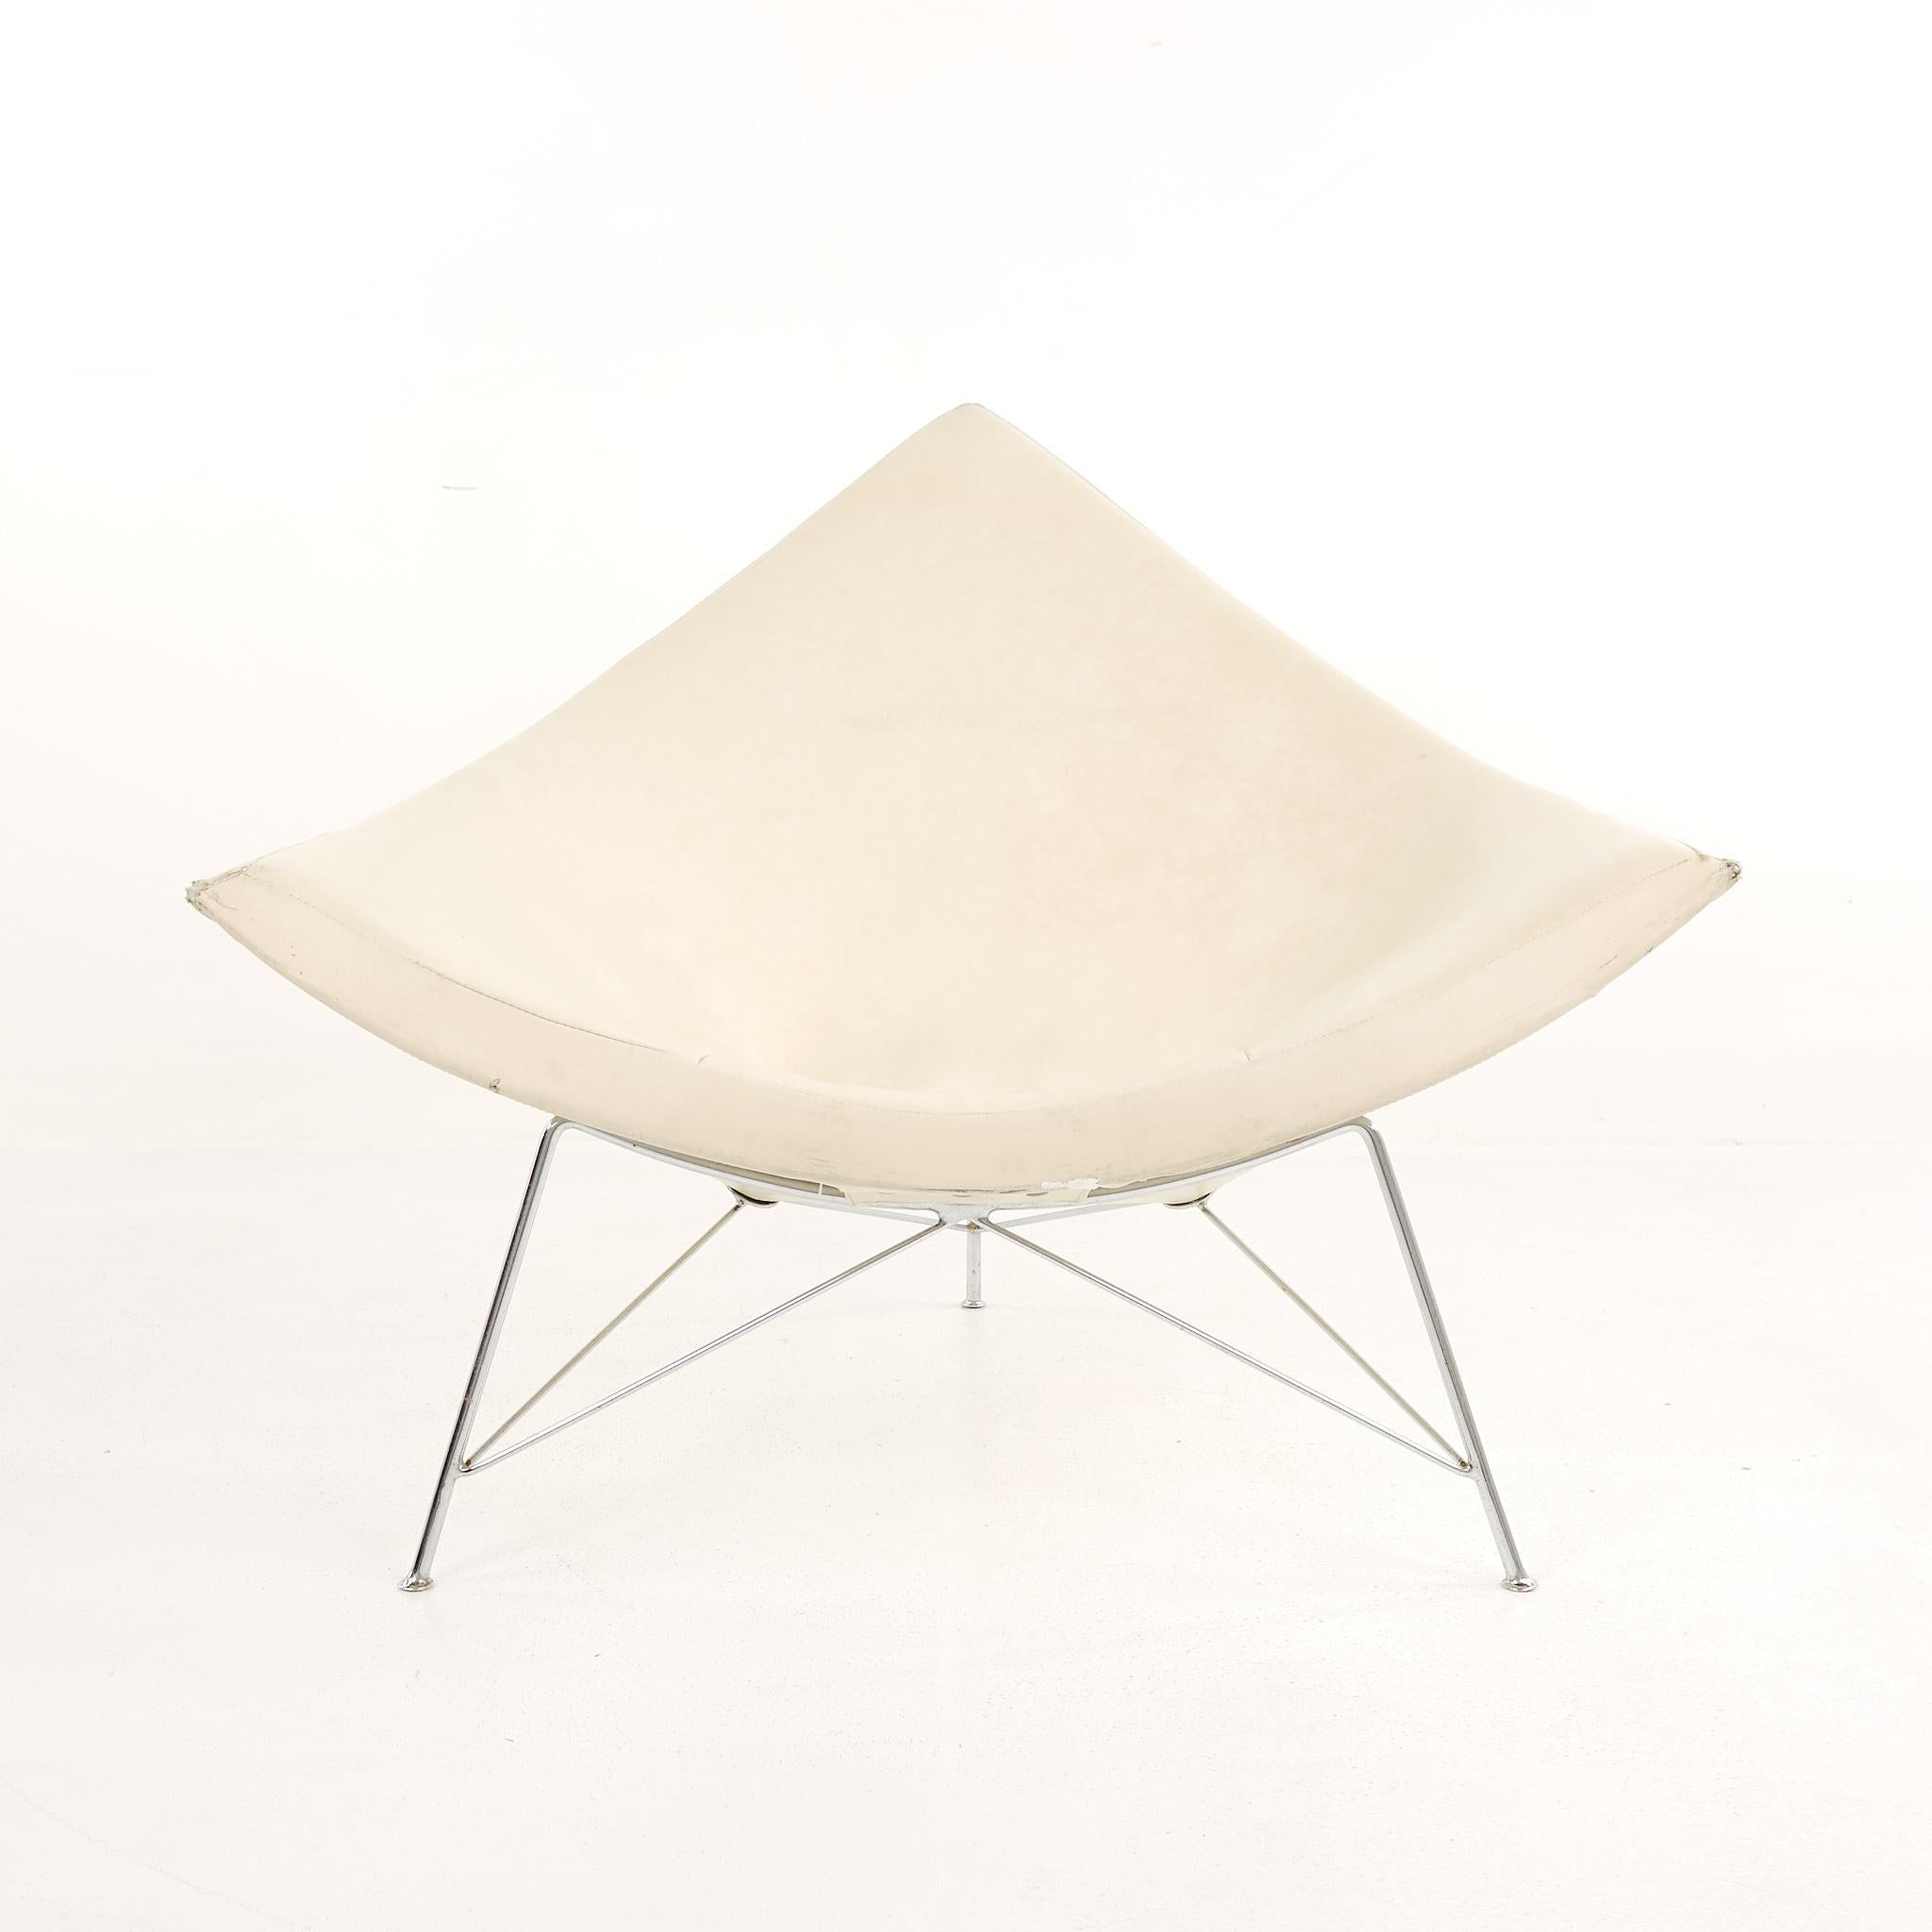 George Nelson mid century coconut chair

The chair measures: 41 wide x 32 deep x 32 high, with a seat height of 14 inches and arm height of 20 inches

Ready for new upholstery. This service is available for an additional fee. 

All pieces of